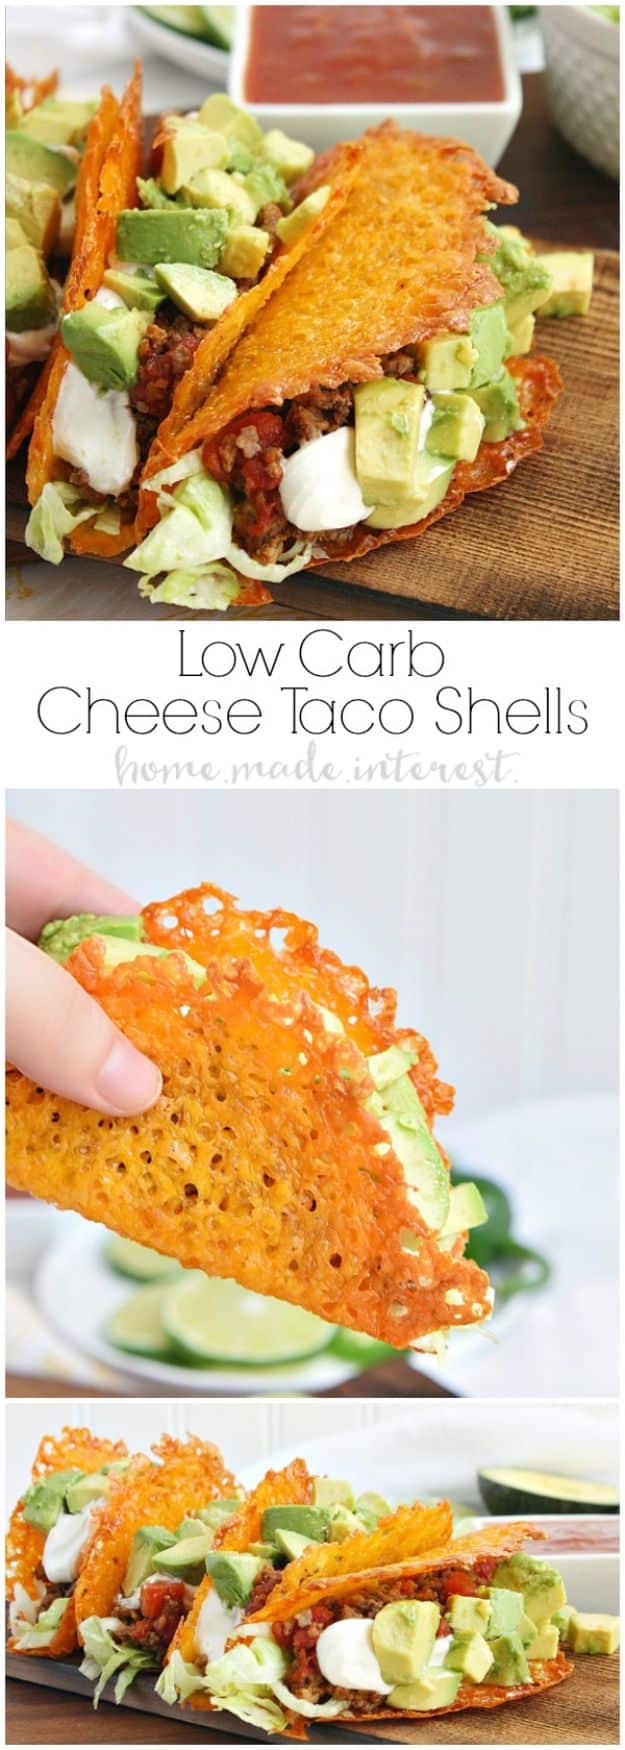 Best Keto Recipes - Low Carb Taco - Easy Ketogenic Recipe Ideas for Breakfast, Lunch, Dinner, Snack and Dessert - Quick Crockpot Meals, Fat Bombs, Gluten Free and Low Carb Foods To Make For The Keto Diet #keto #ketorecipes #ketodiet